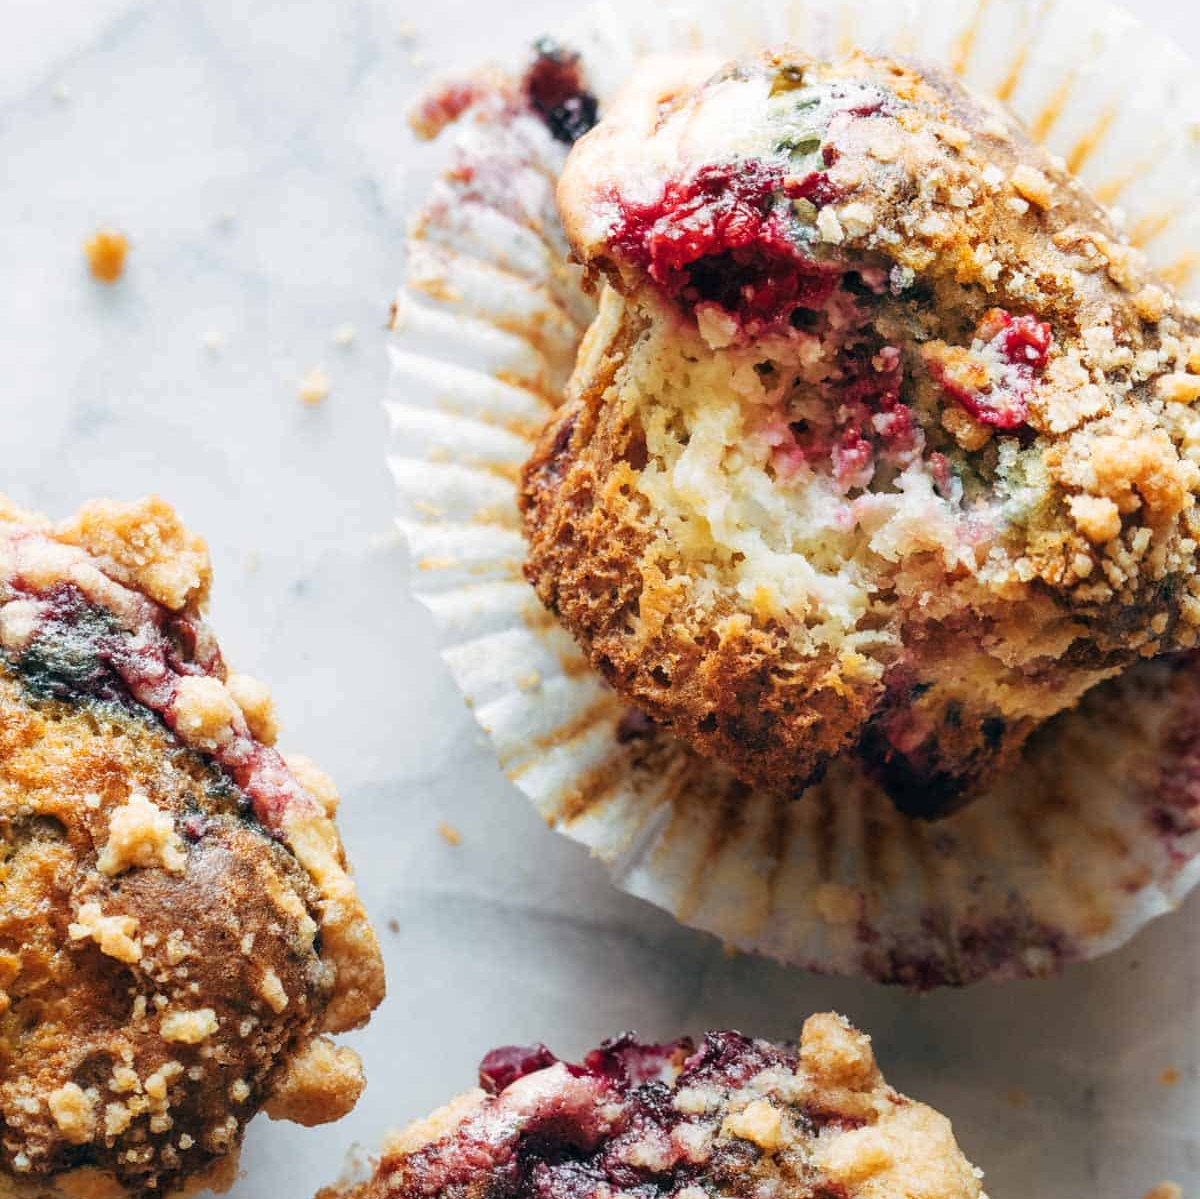 Juicy berries, a luscious cheesecake layer, and some heavy streusel on top a muffin.